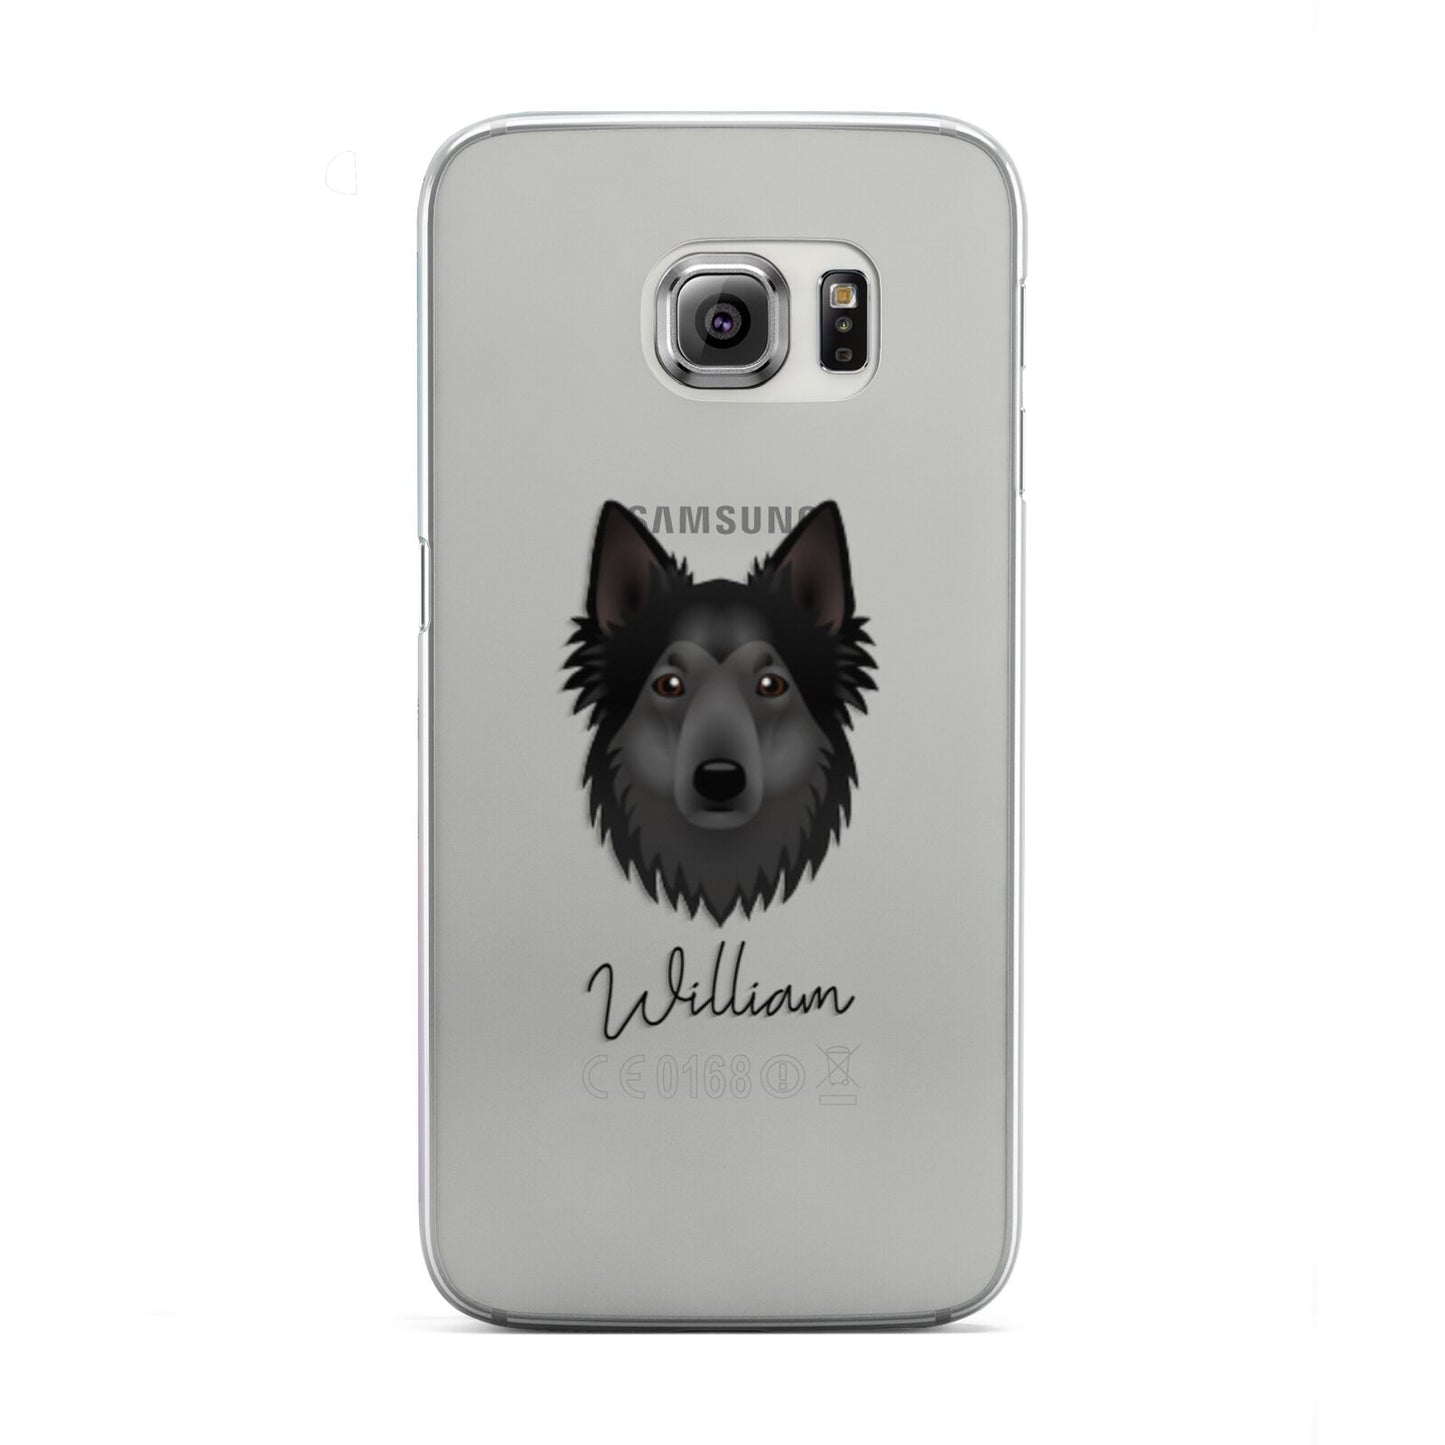 Shollie Personalised Samsung Galaxy S6 Edge Case